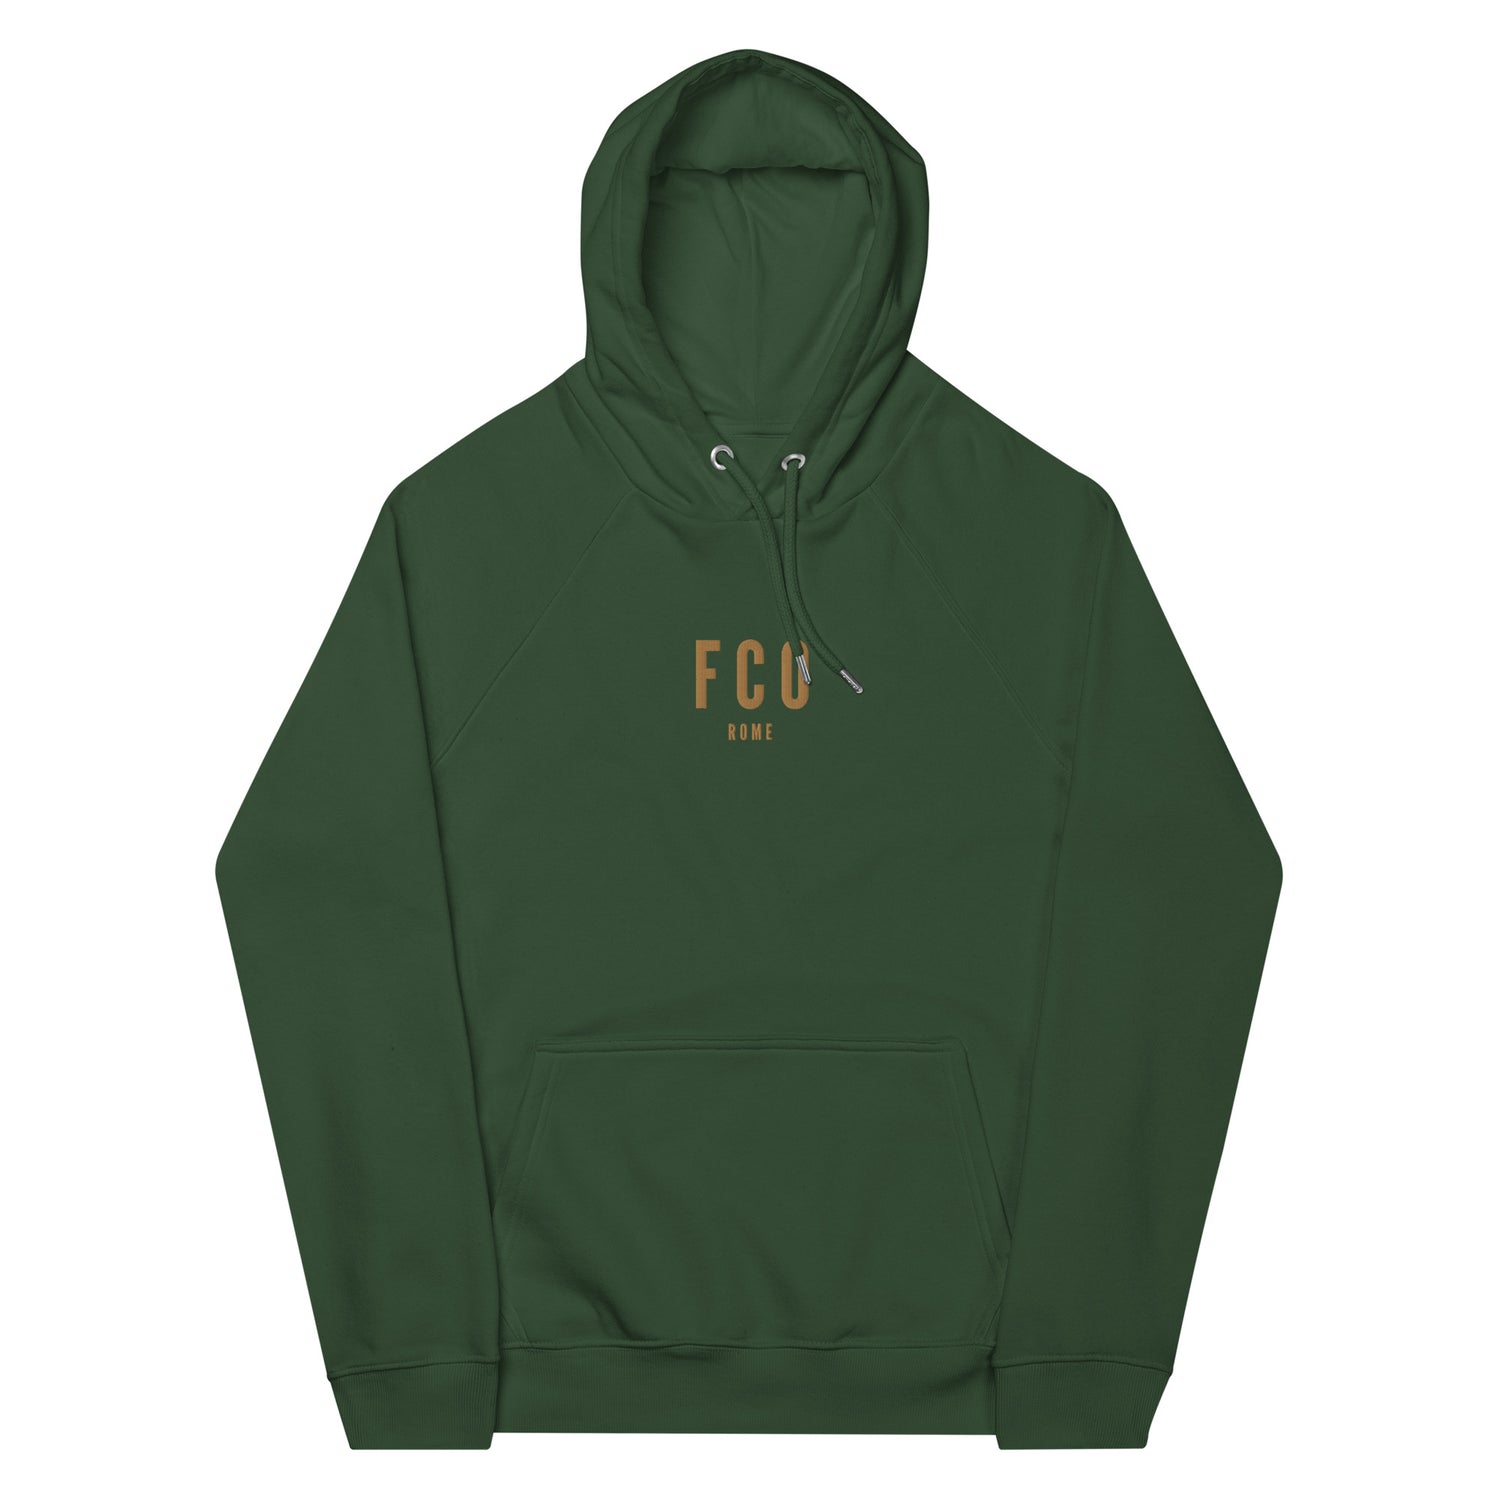 Rome Italy Hoodies and Sweatshirts • FCO Airport Code